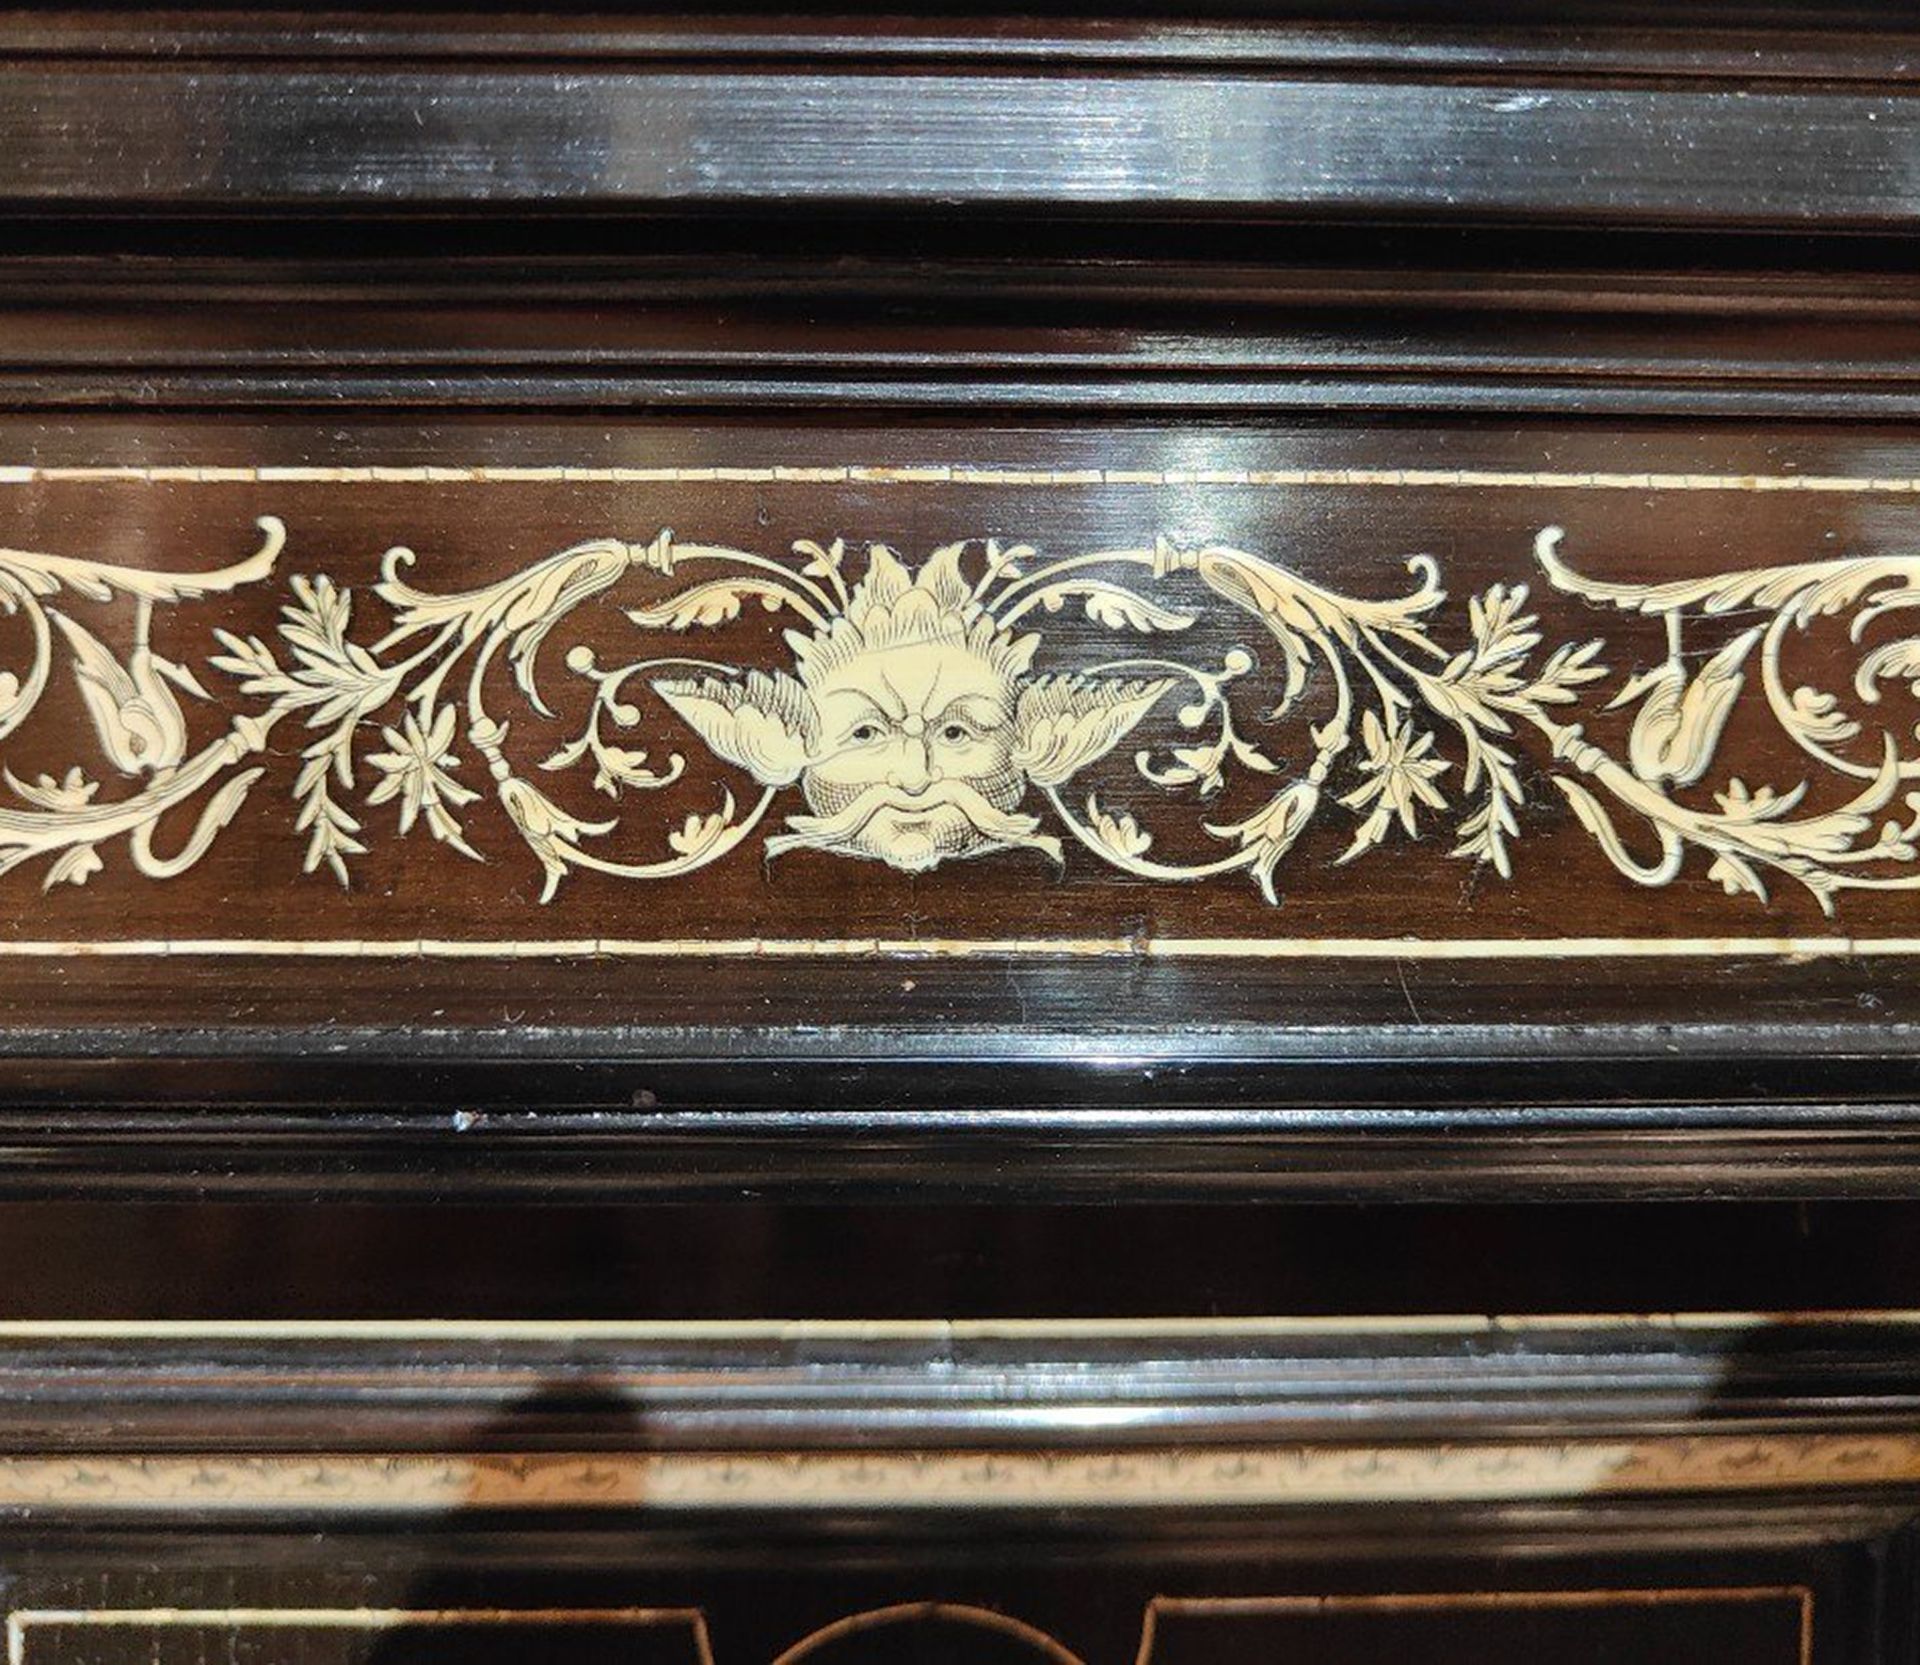 Important 19th century Florentine cabinet with bone marquetry, work from Northern Italy, Milan or Fl - Image 7 of 10